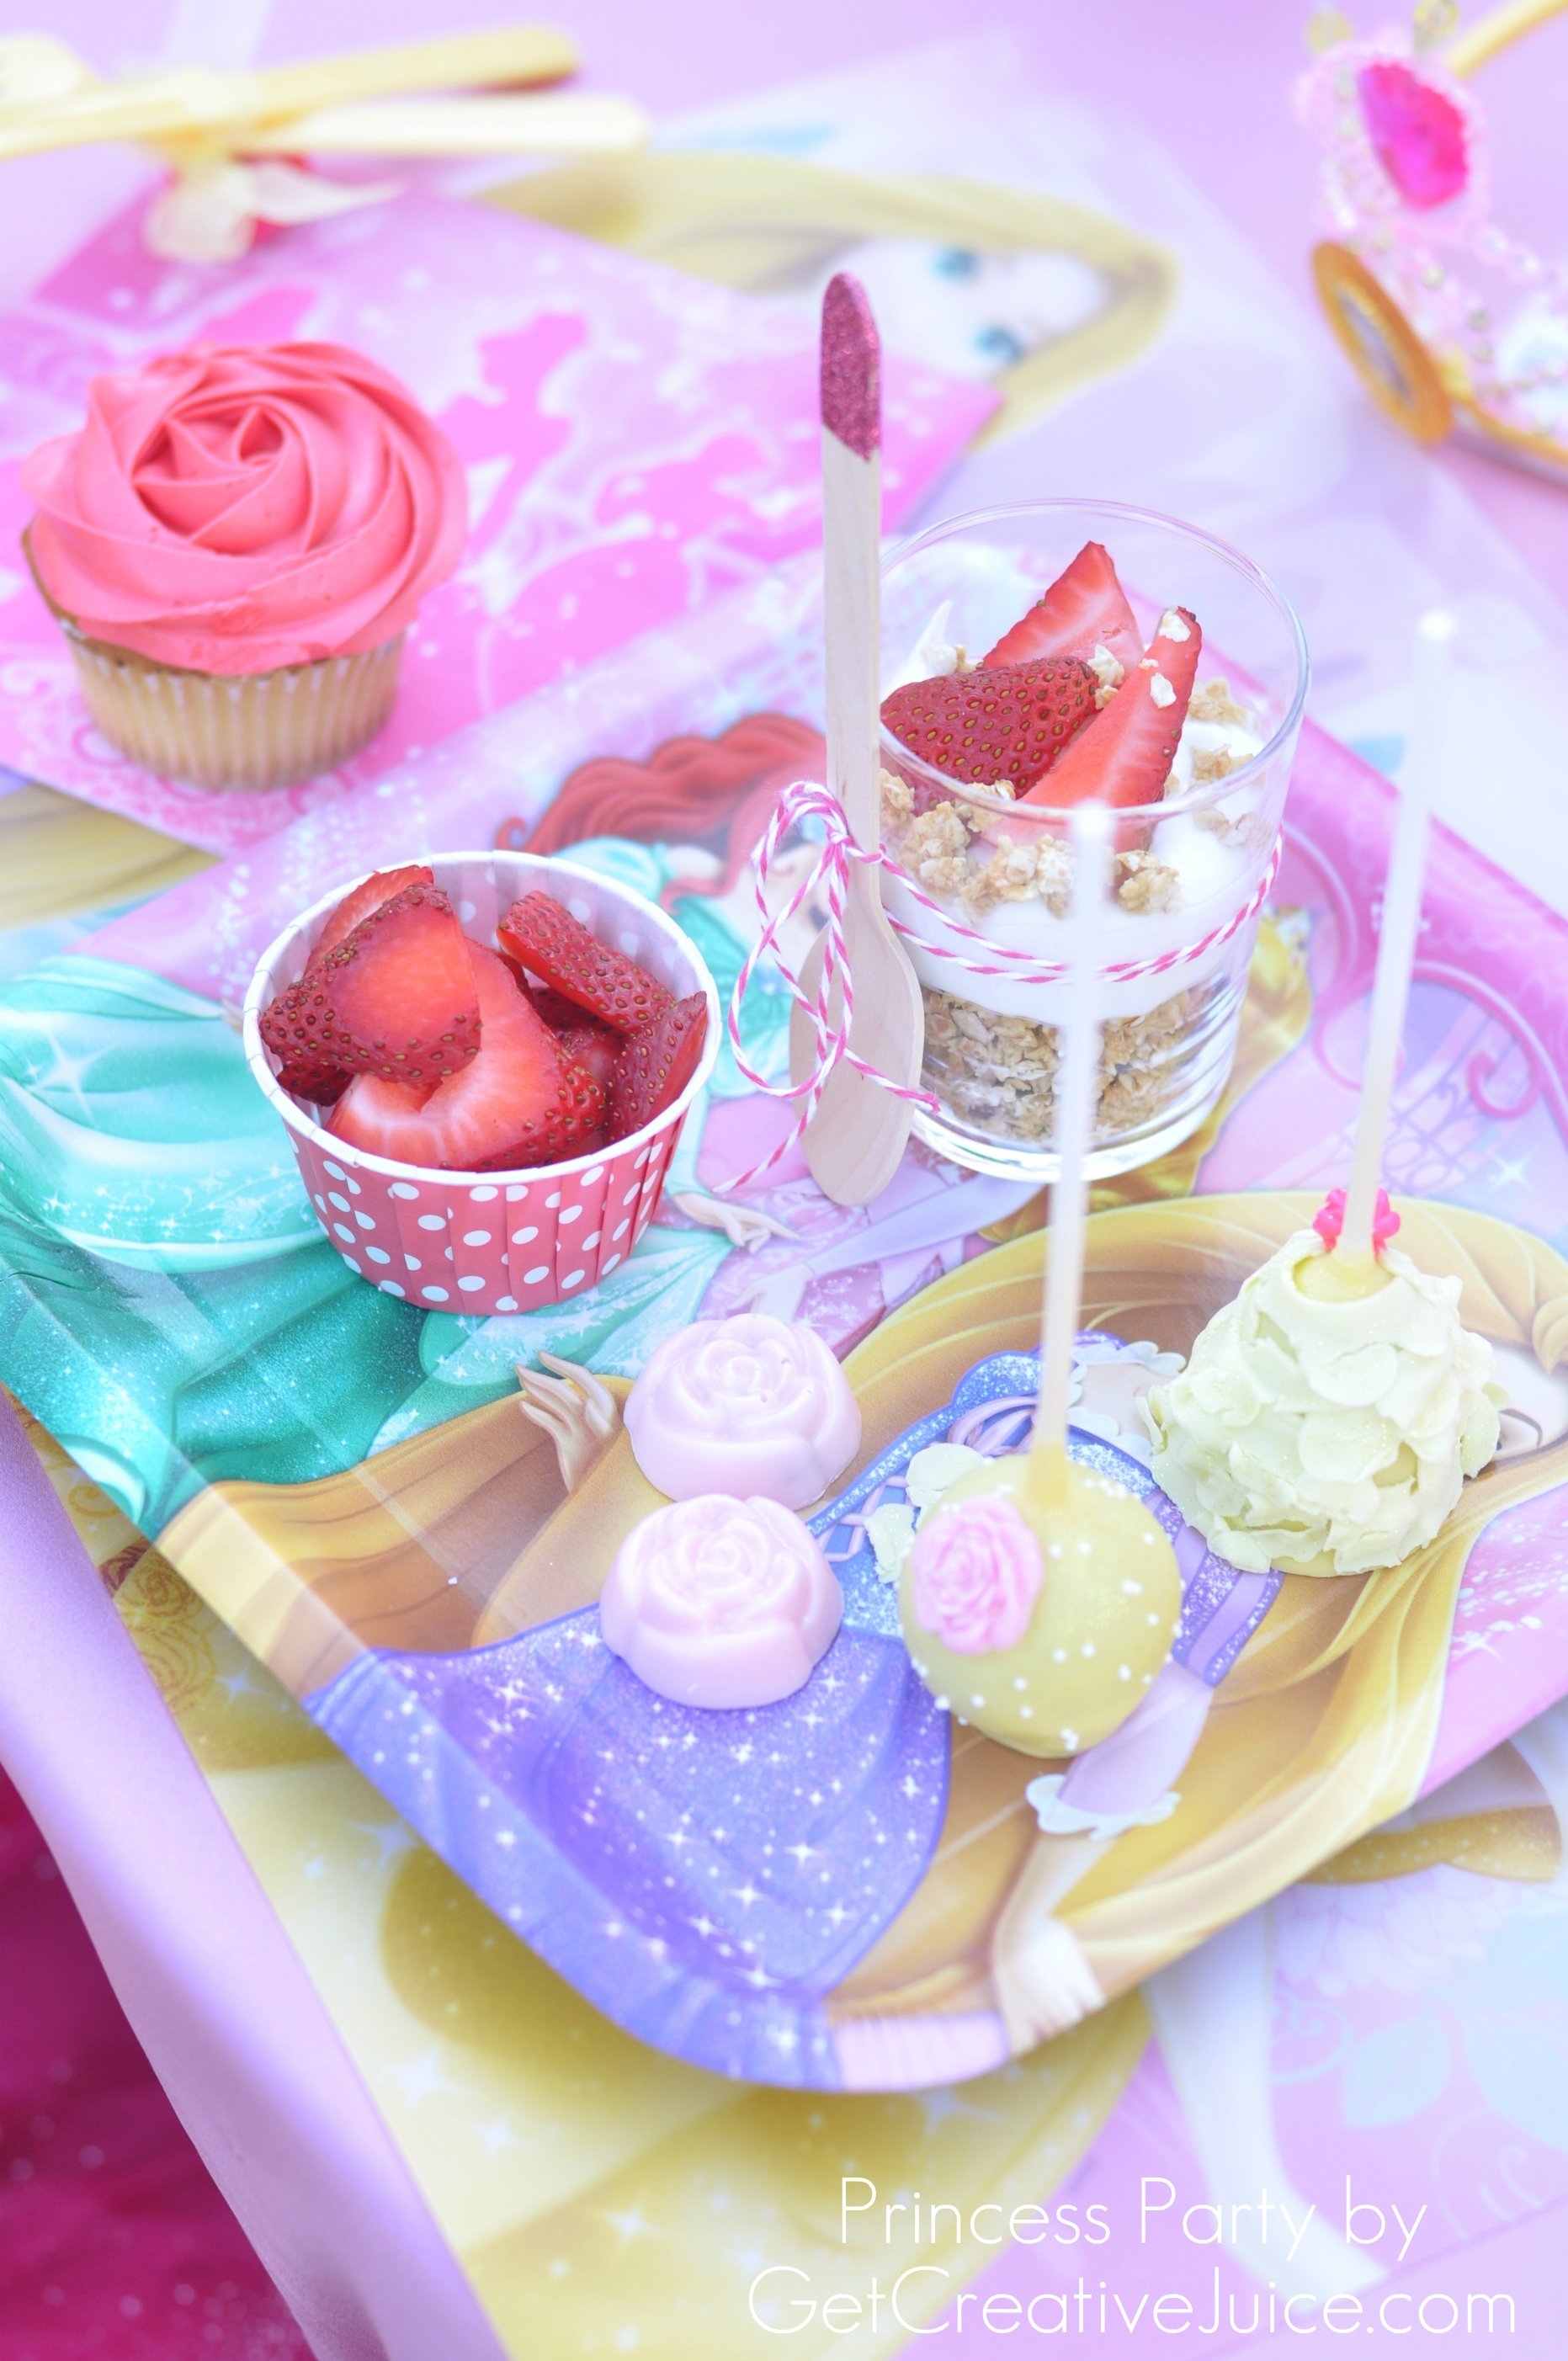 10 Stylish Ideas For A Princess Party disney princess party with belle part 2 creative juice 1 2022